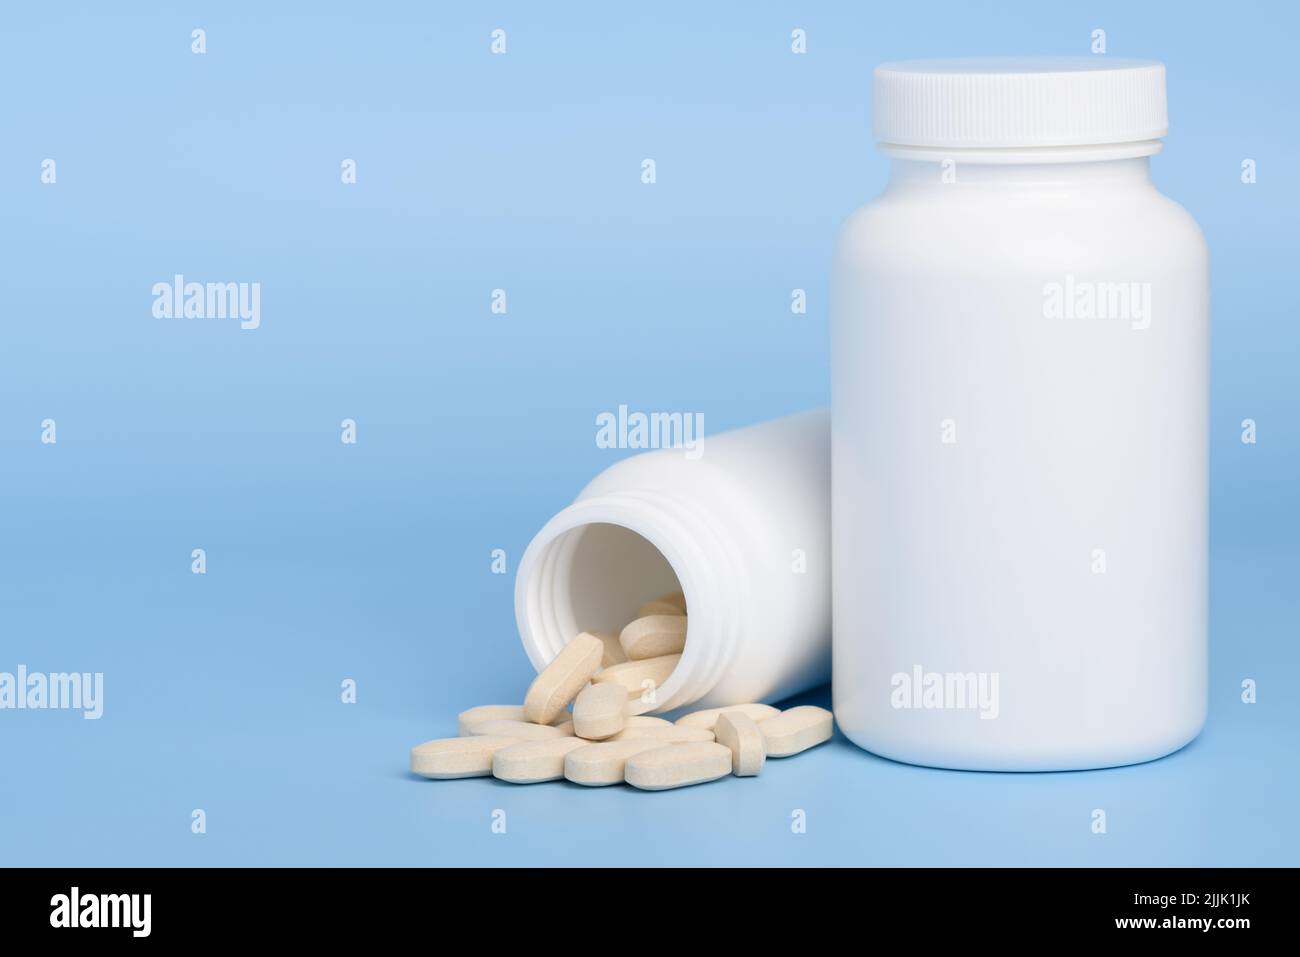 Two white medicine bottles, one closed and second with pills spilled on blue background with copy-space Stock Photo